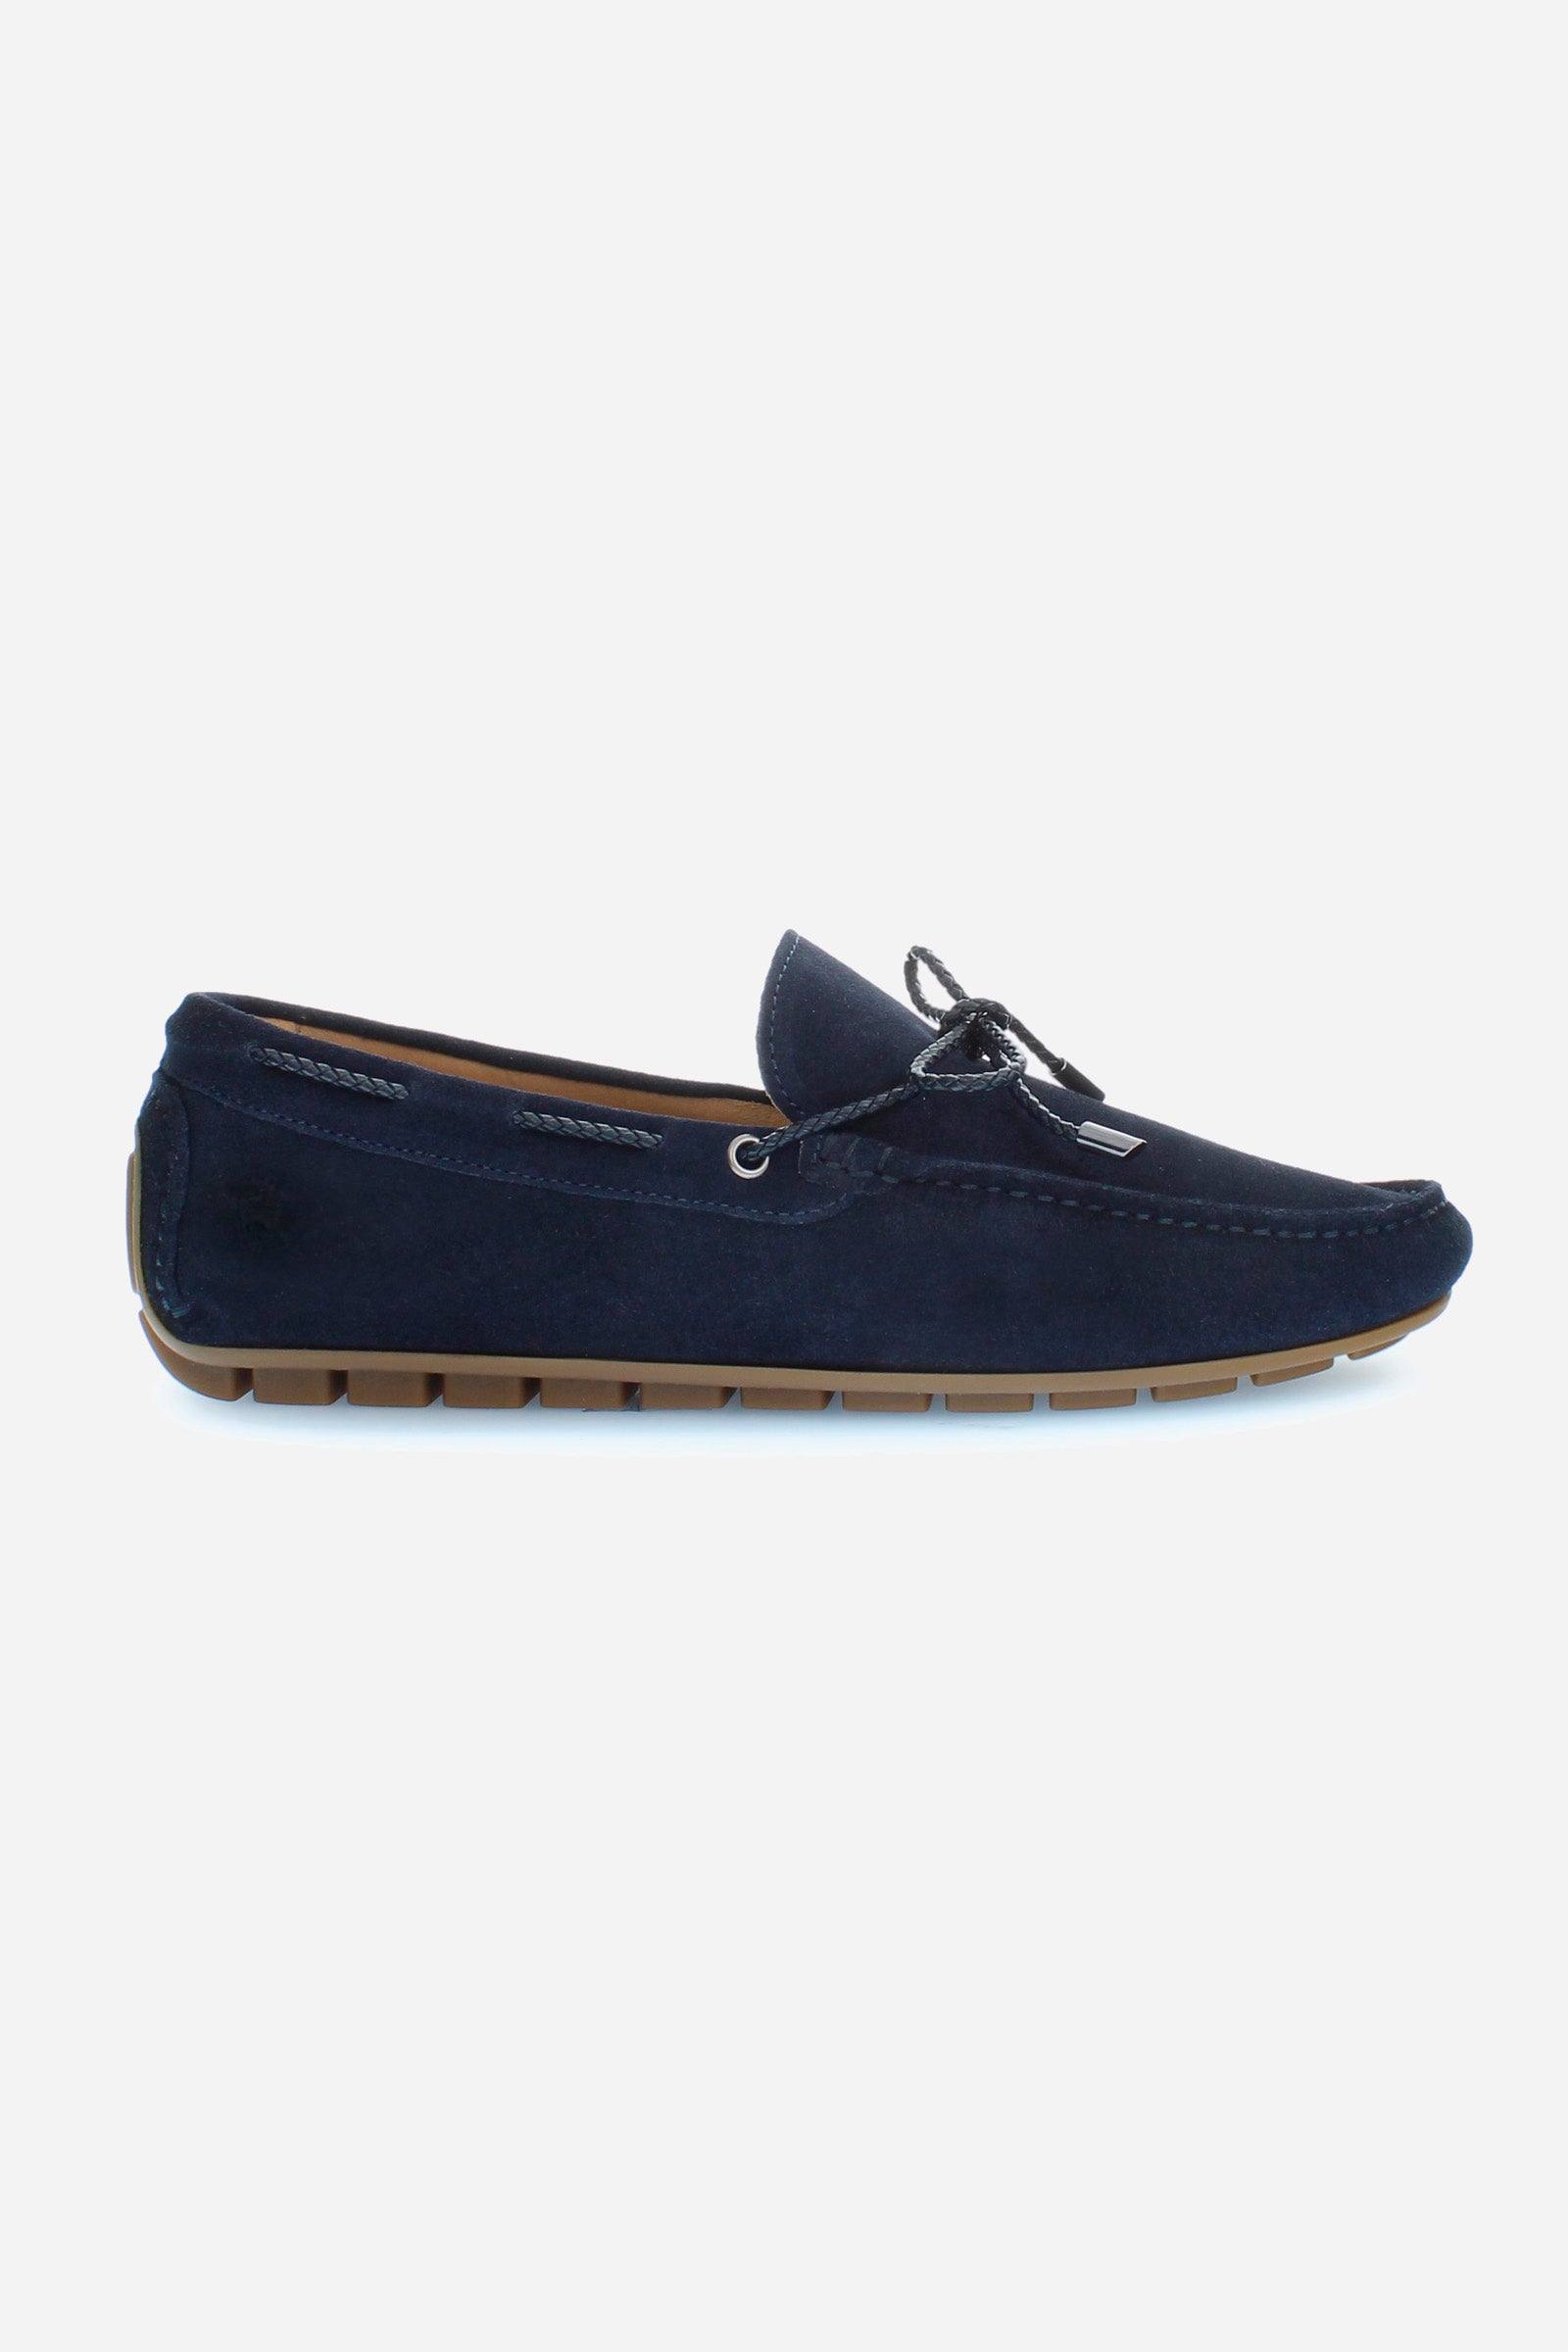 Men's suede loafers with laces